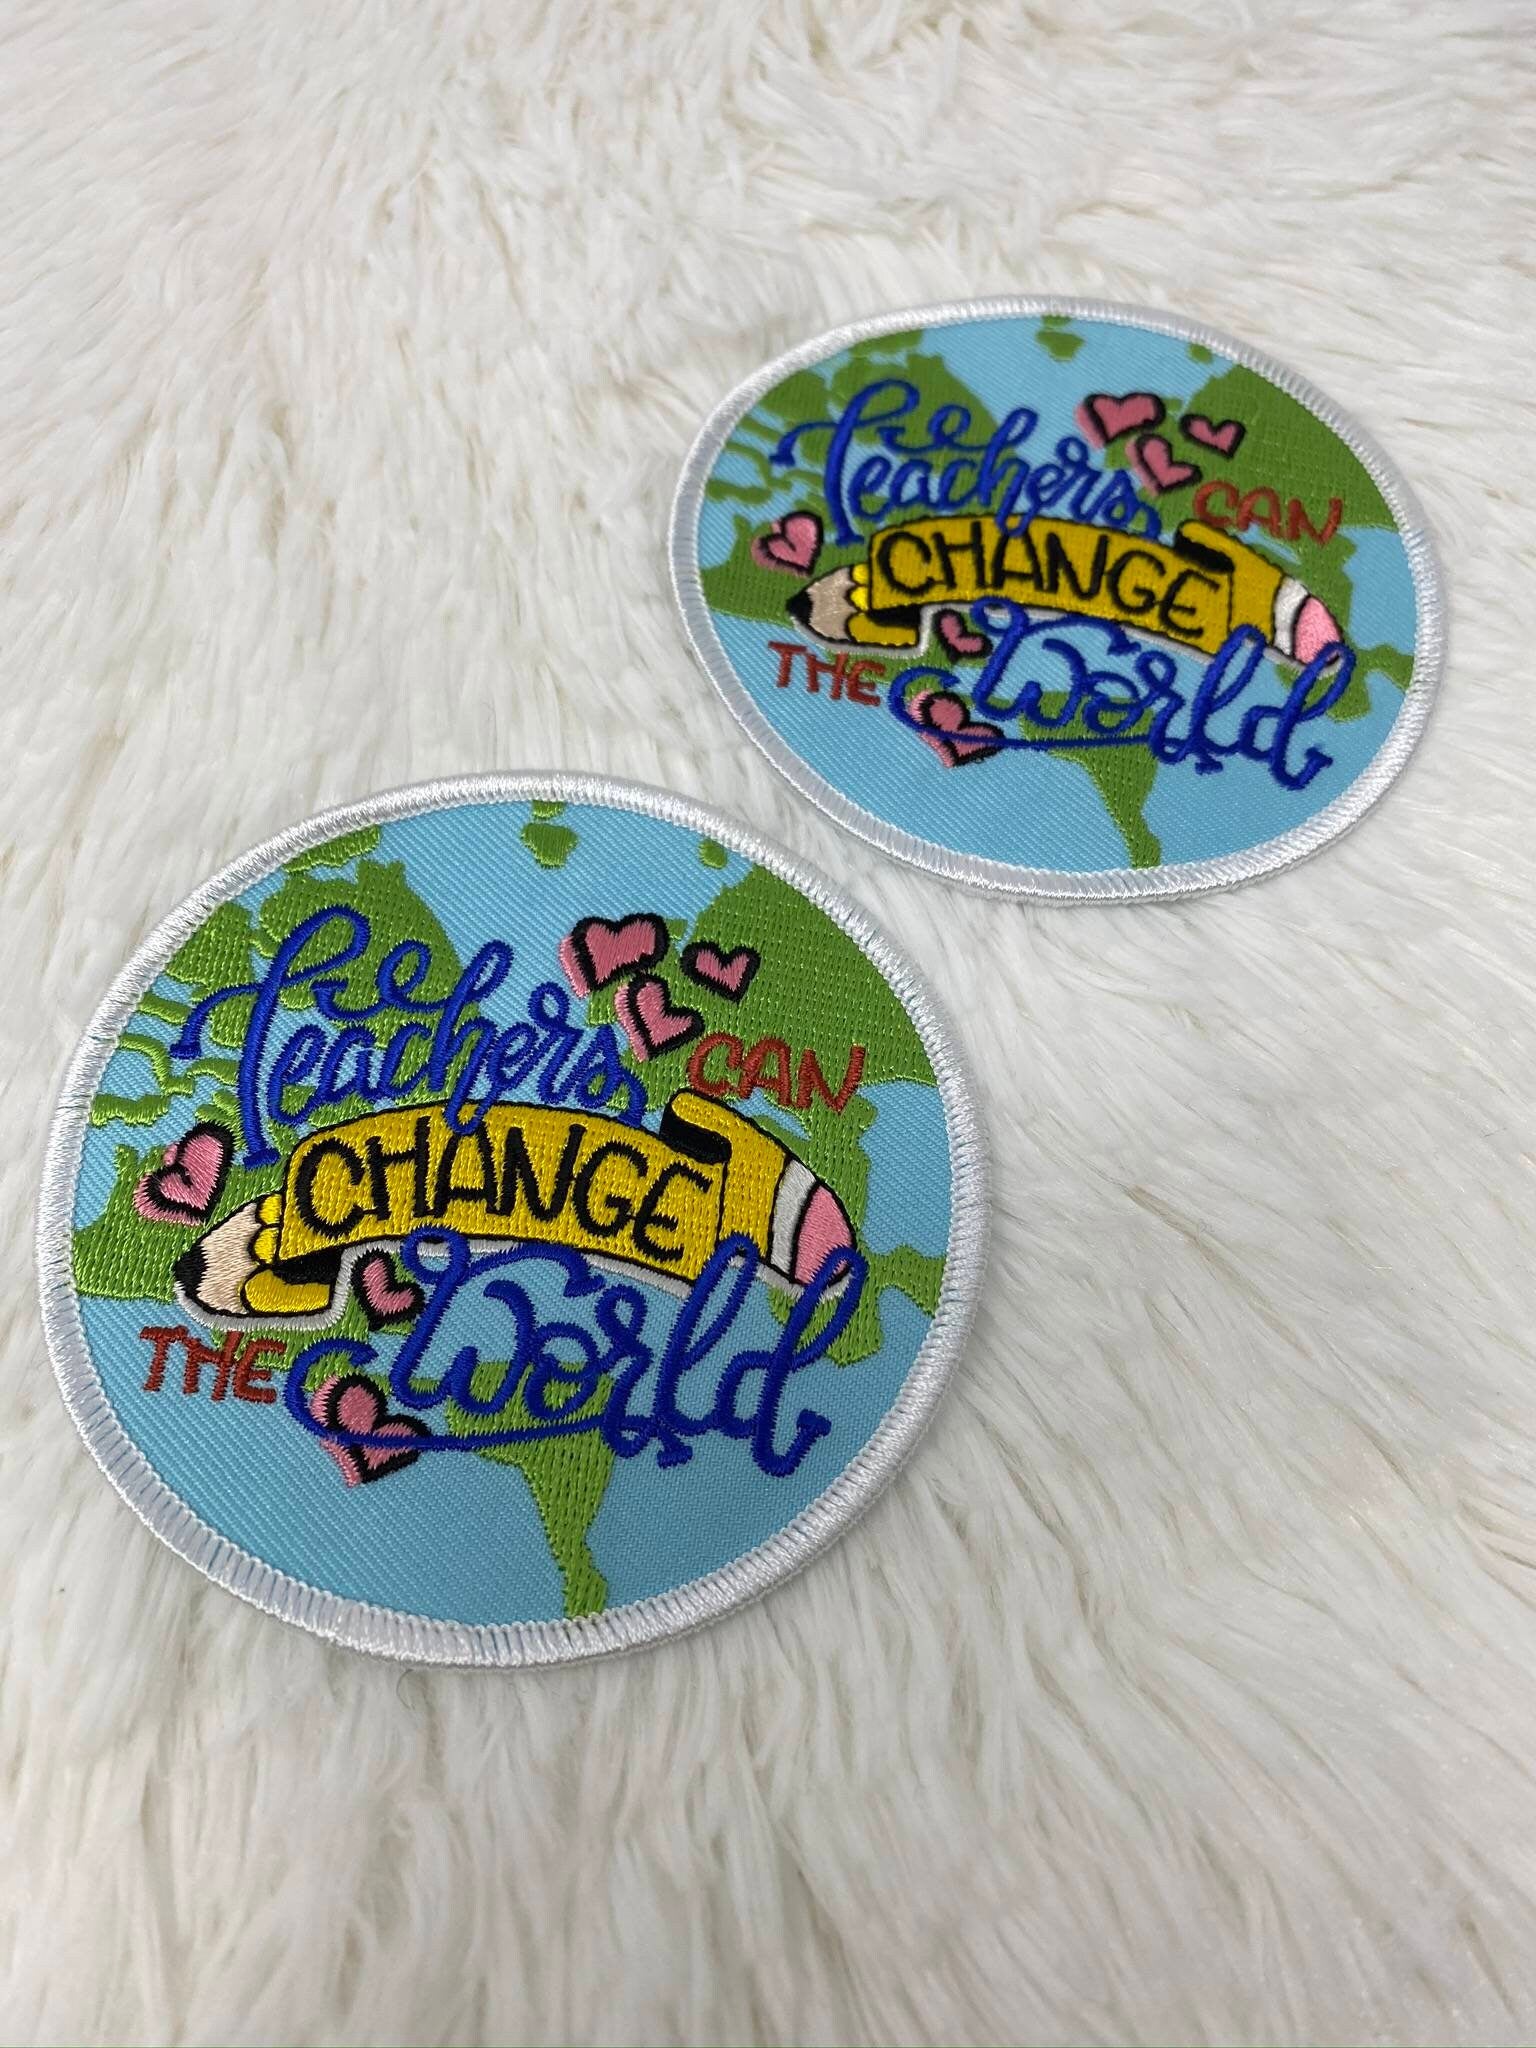 Teacher's Appreciation Gift - Iron-on Embroidery Patch for Teacher's - "Teacher's Can Change the World" Size 3" Circular Applique for Denim